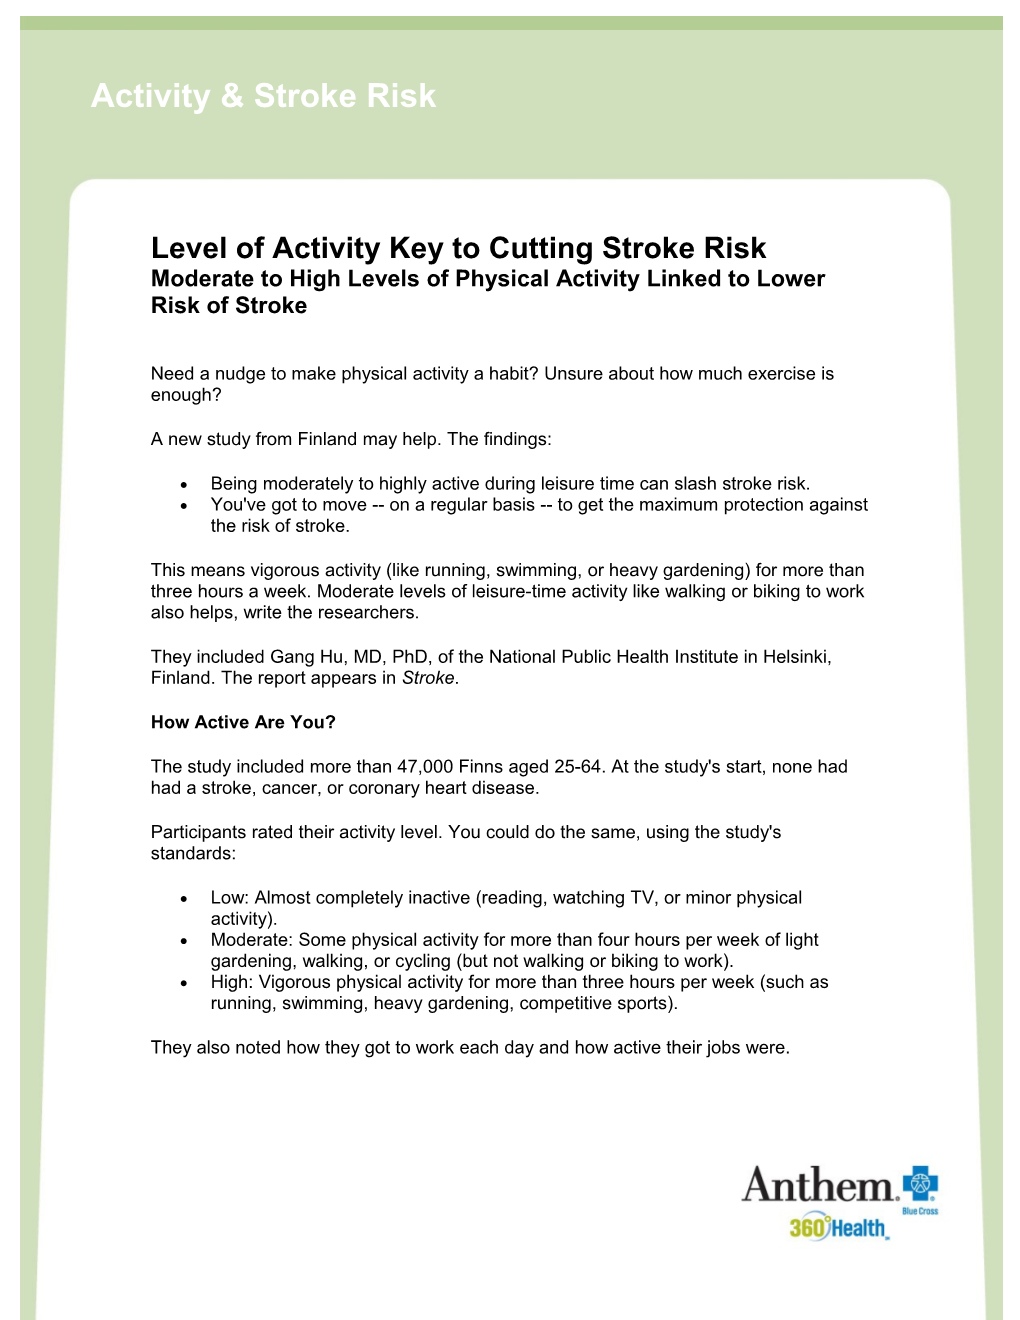 Level of Activity Key to Cutting Stroke Risk